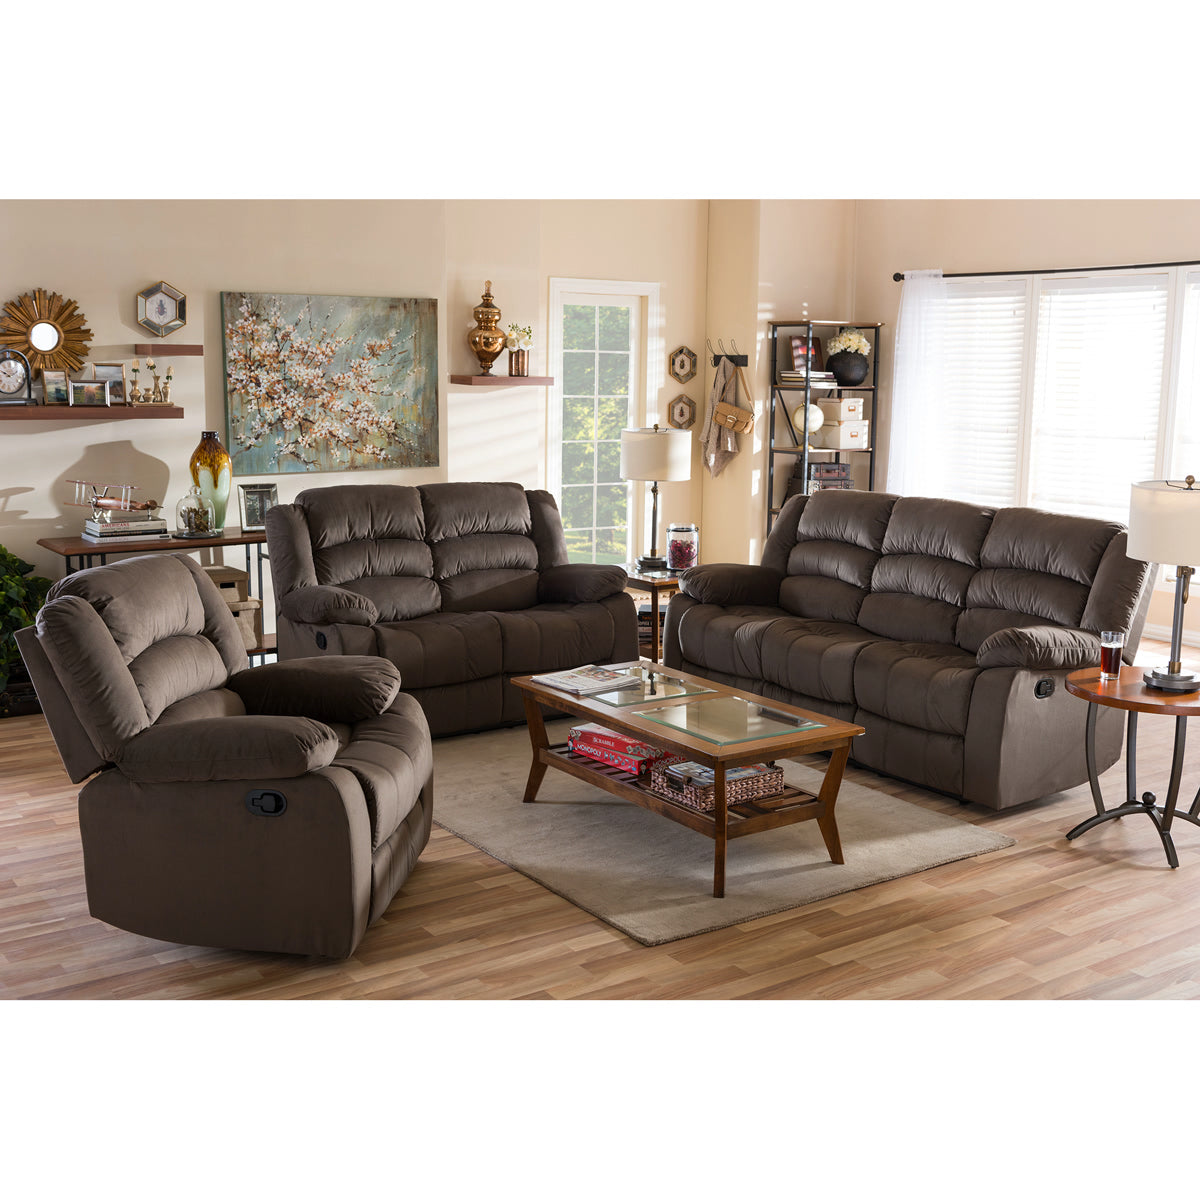 Baxton Studio Hollace Modern and Contemporary Taupe Microsuede Sofa Loveseat and Chair Set with 5 Recliners Living room Set Baxton Studio--Minimal And Modern - 5